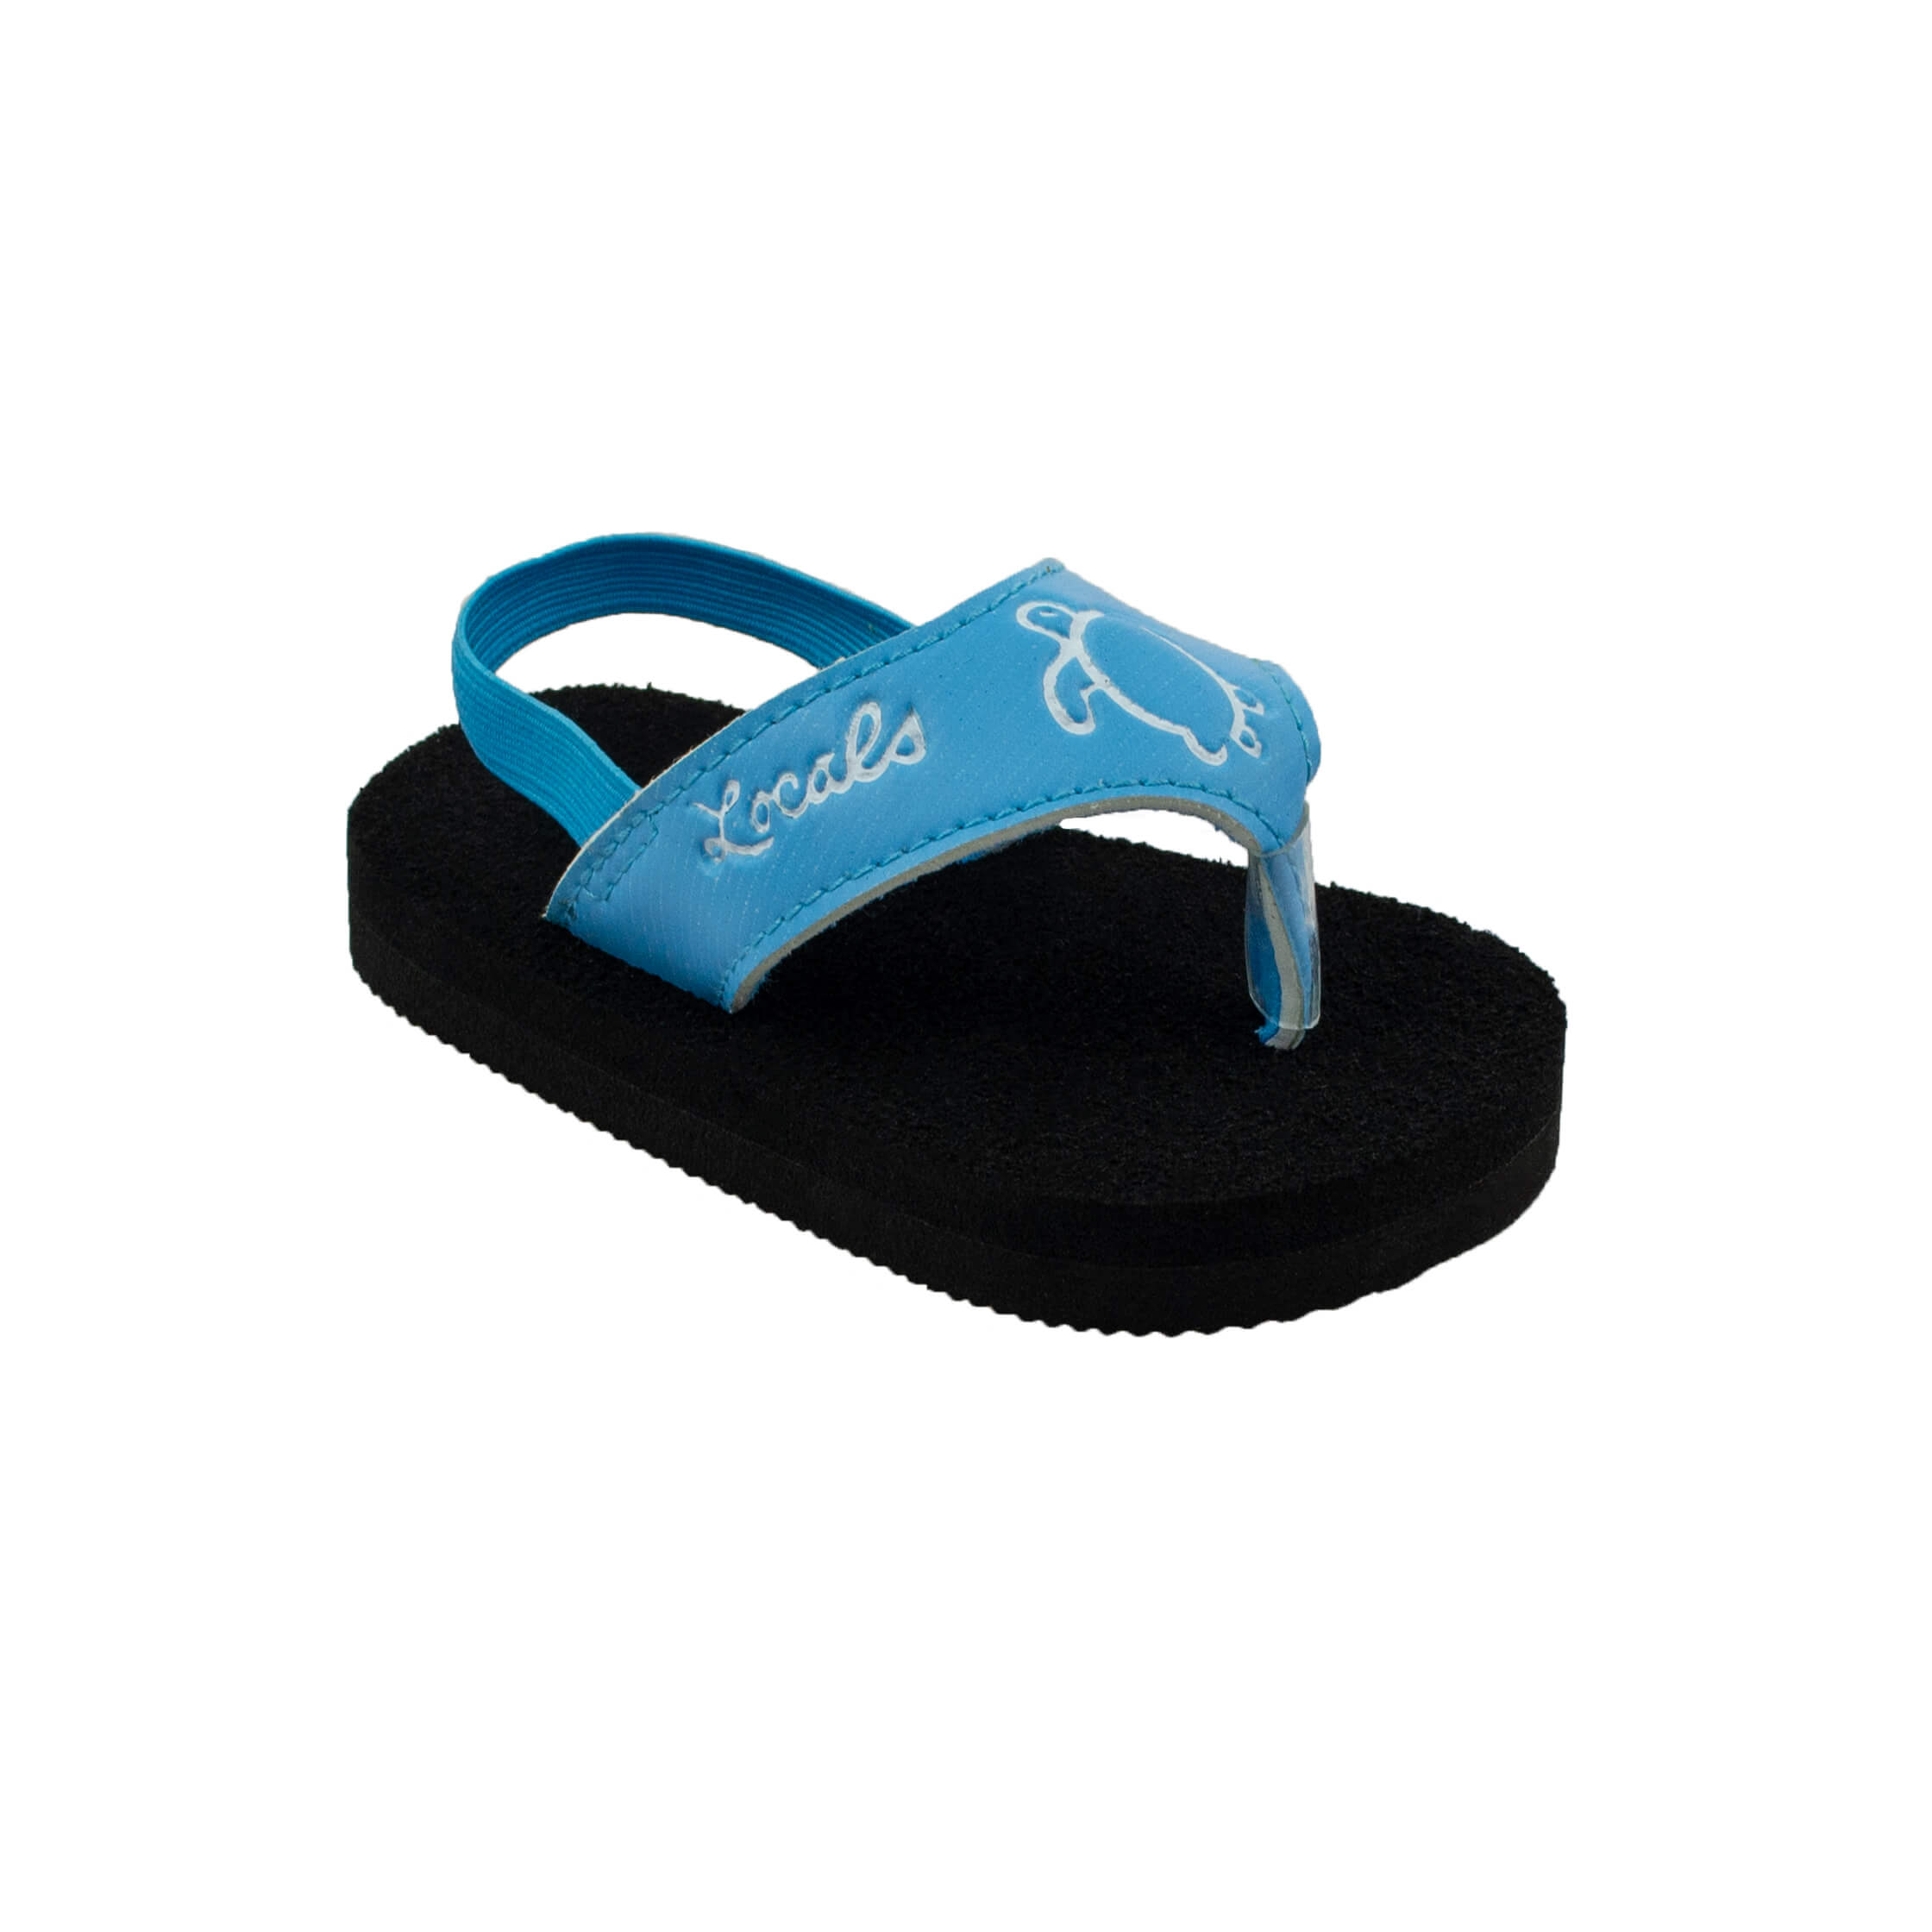  Locals Original Slippa 7.5 Clear - Sizing: Kids Size US  10.0-11.0 - Flip Flop Slipper Sandals : Clothing, Shoes & Jewelry